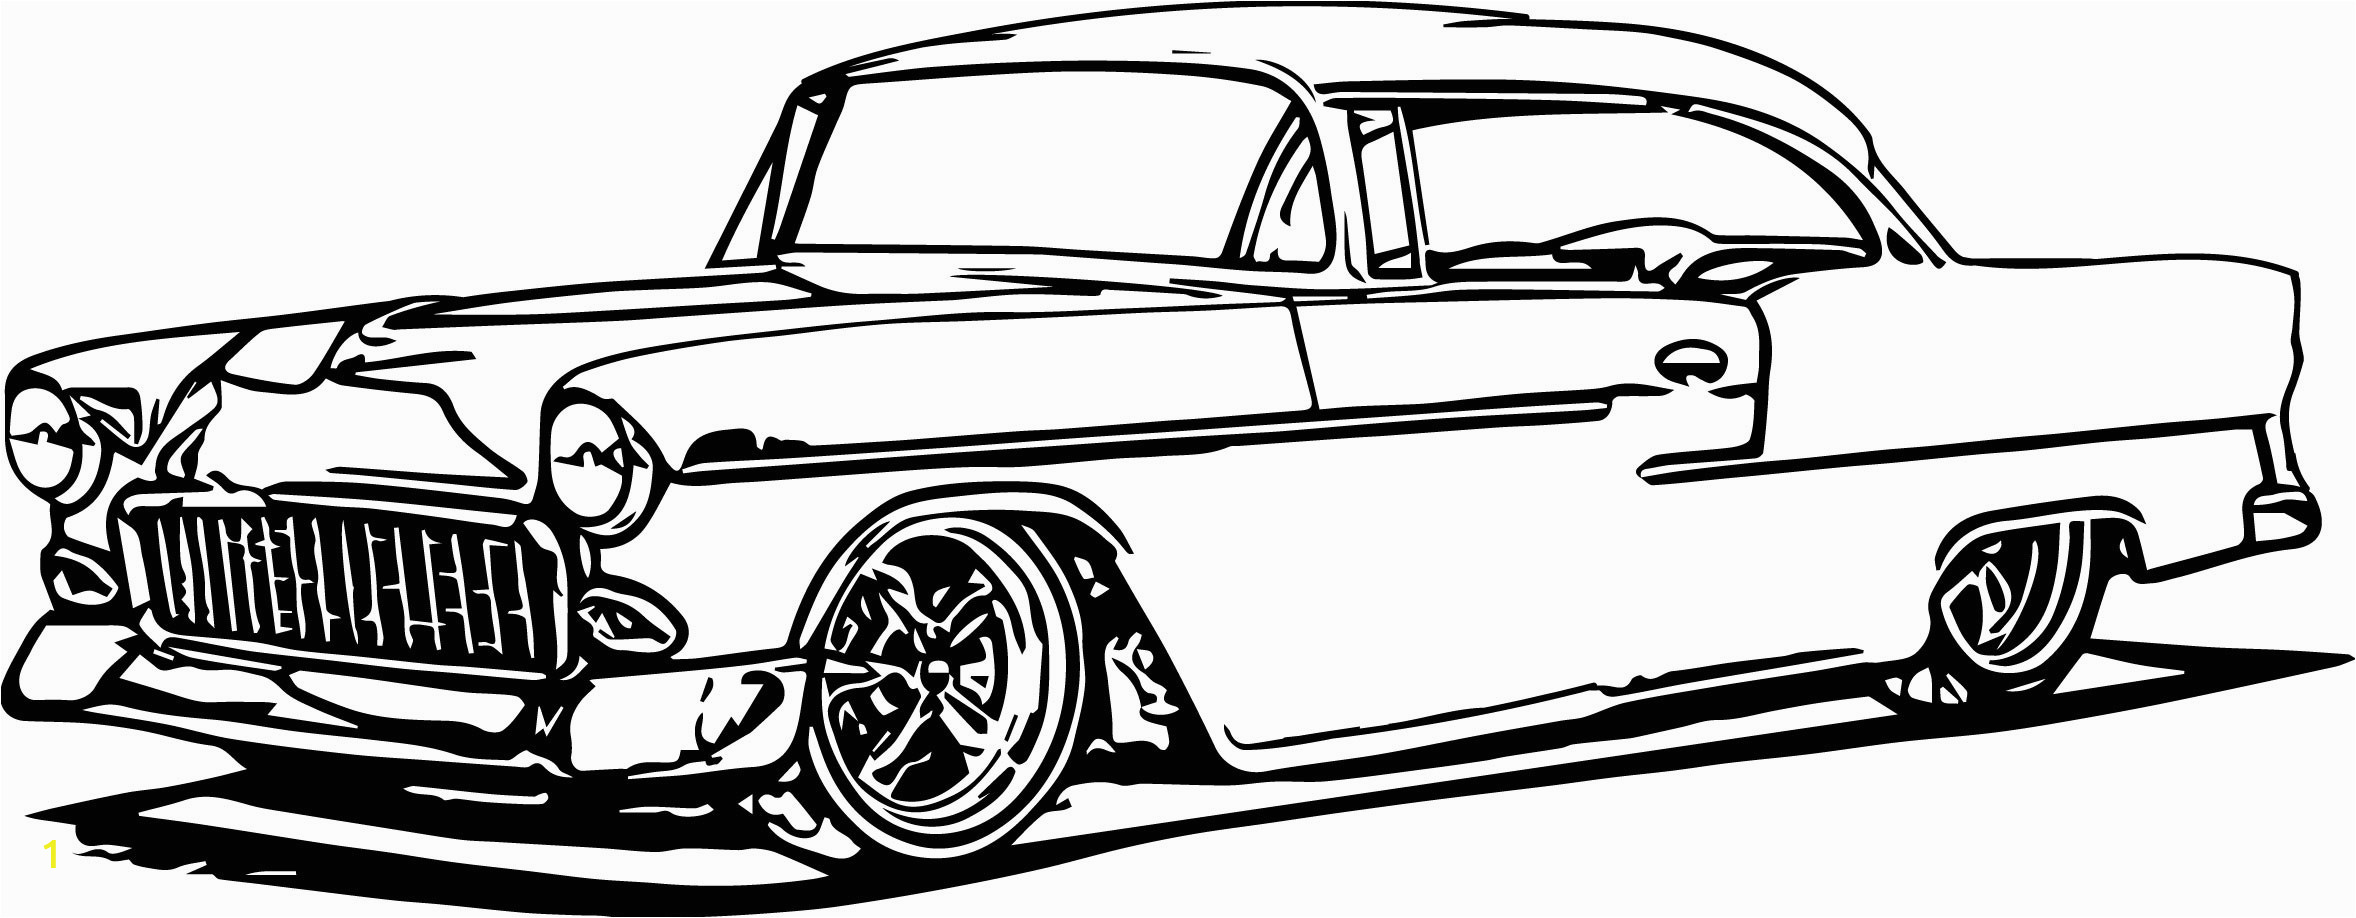 Free Printable Hot Rod Coloring Pages Hot Rod Coloring Pages to Print Download